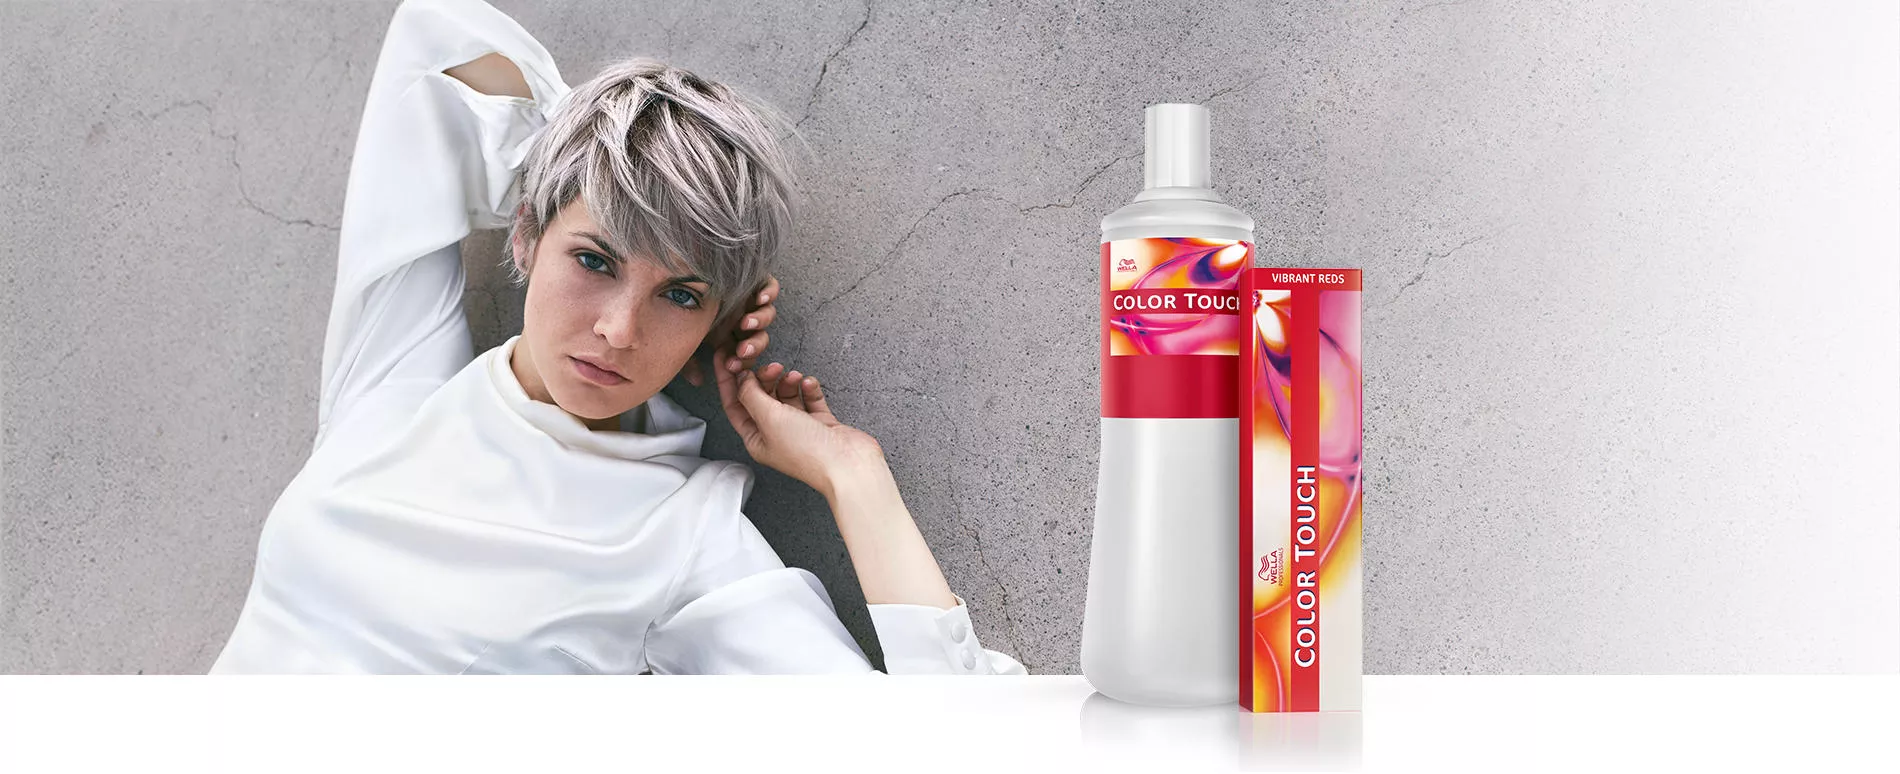 woman with short smoky blonde hair, and a box of color touch plus in the foreground